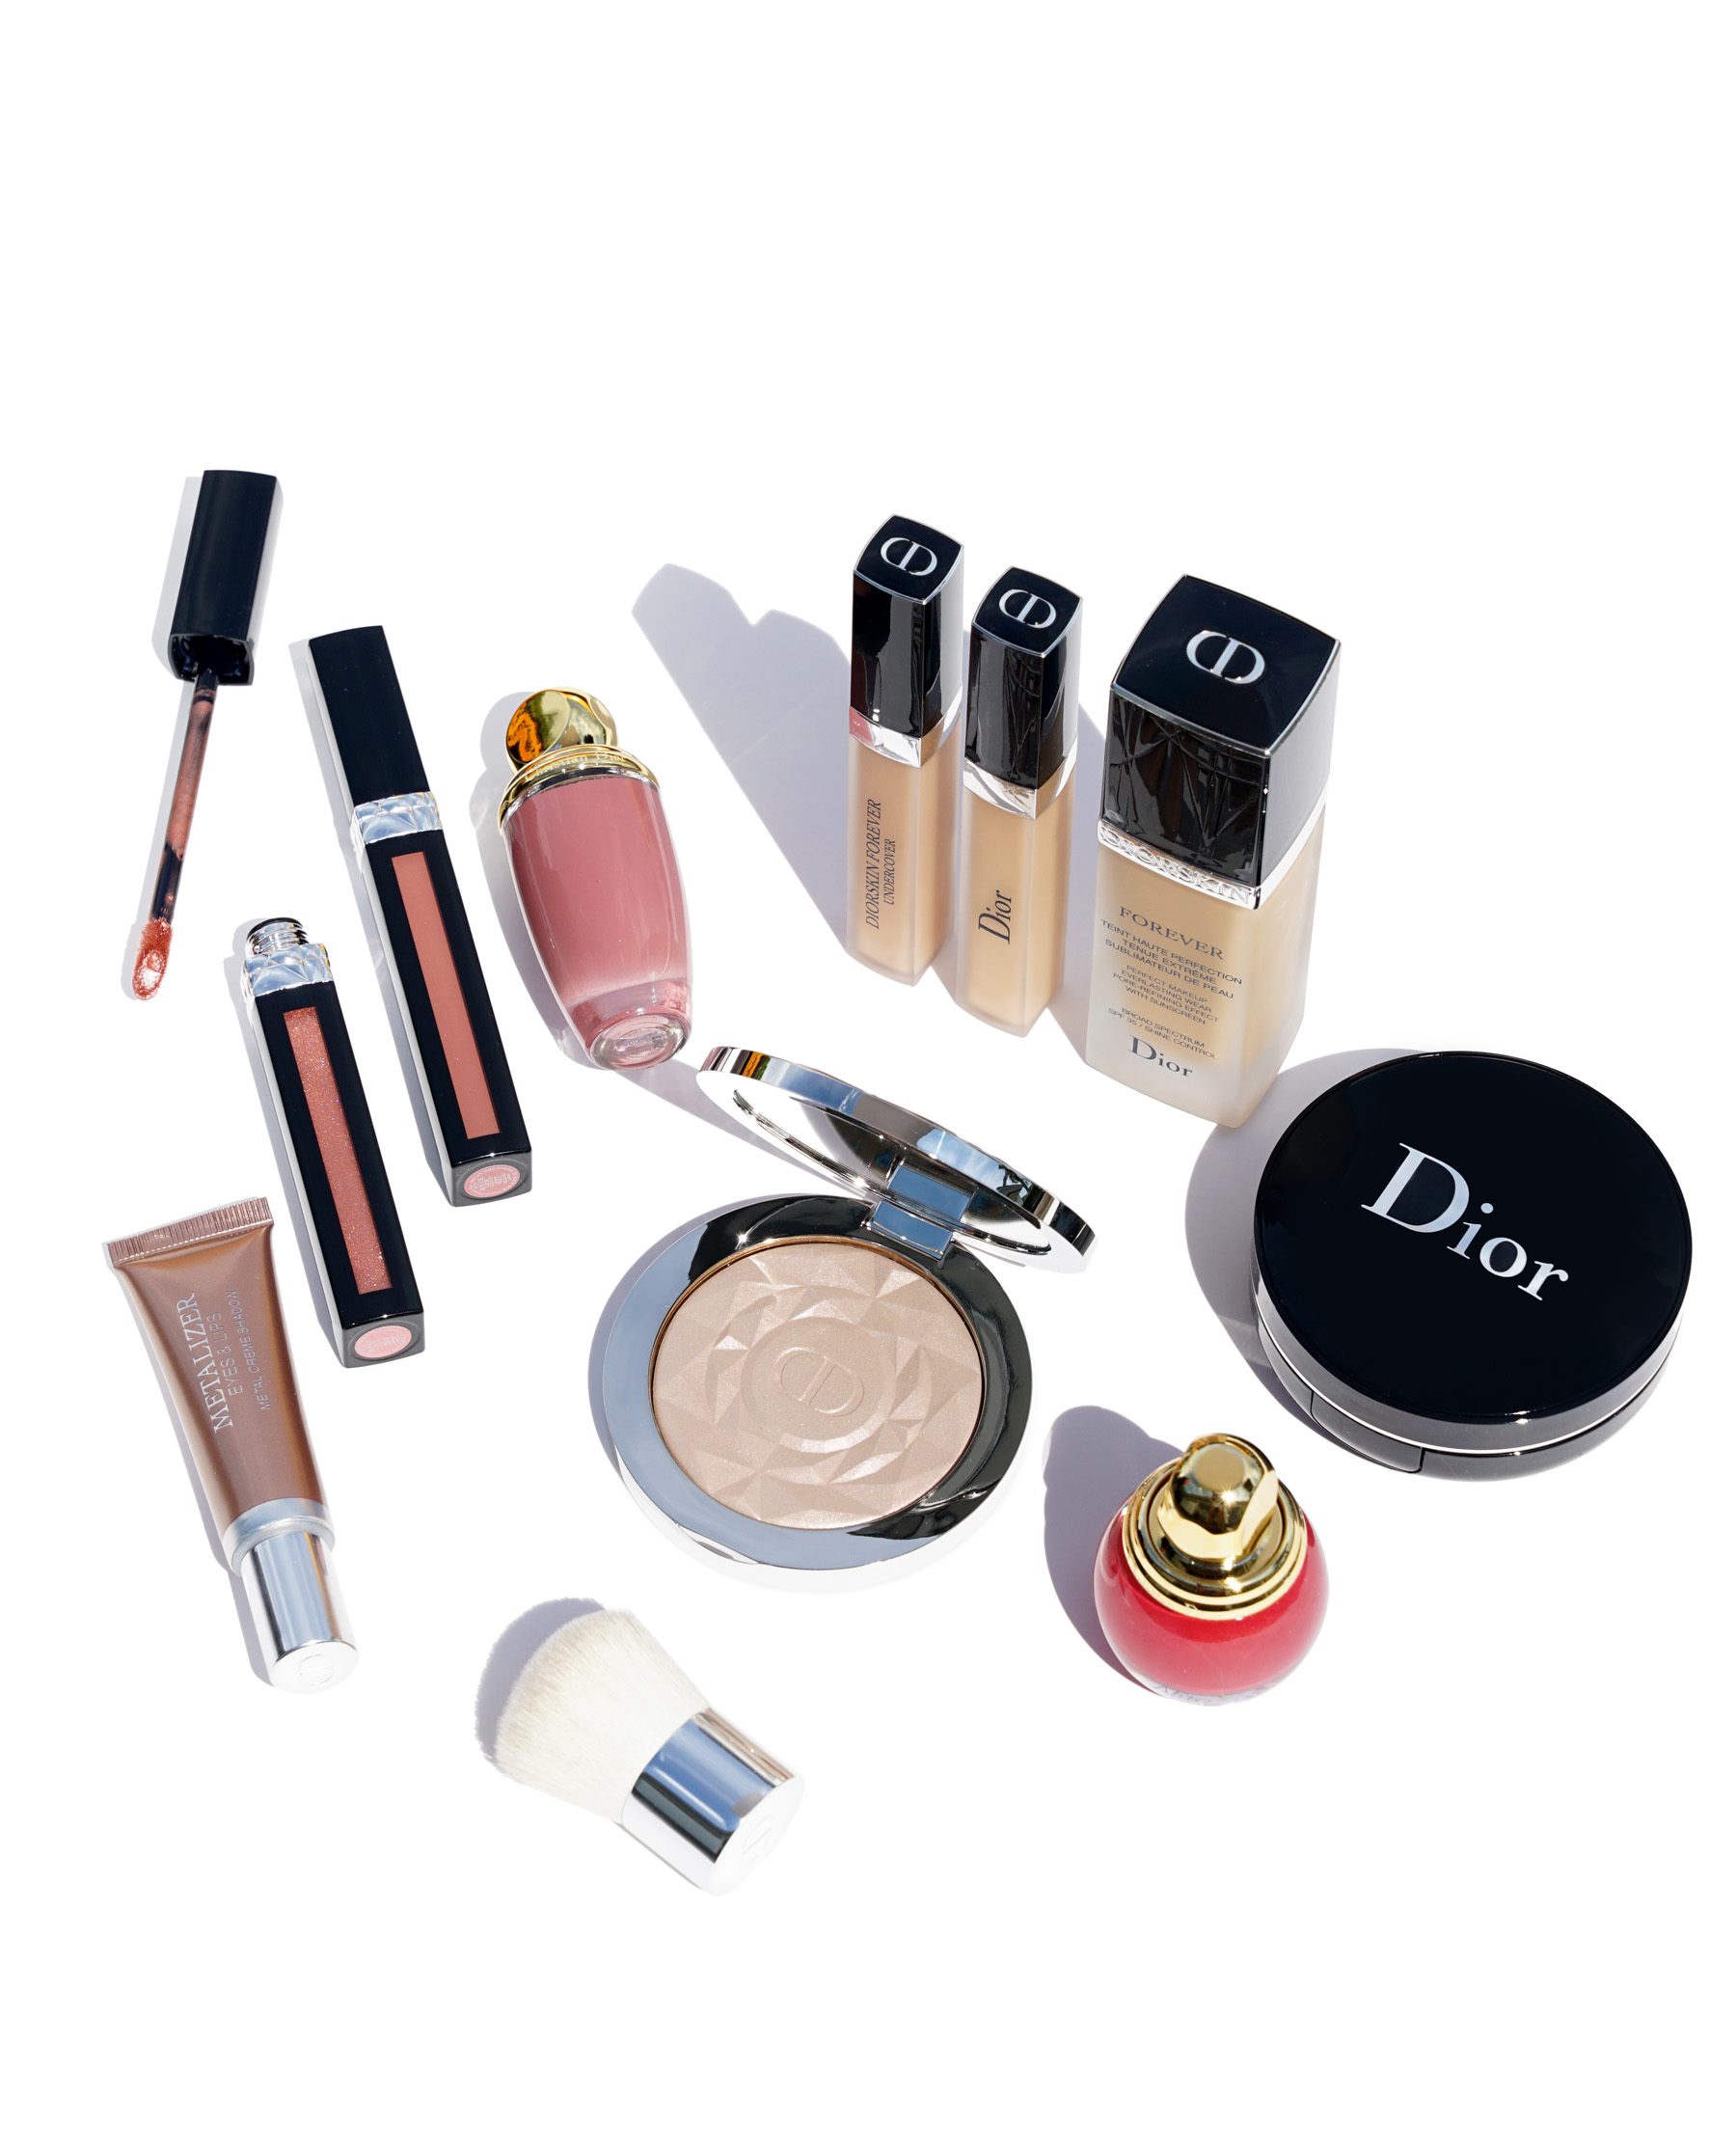 Give Dior Forever Natural Velvet Compact Foundation for Holiday